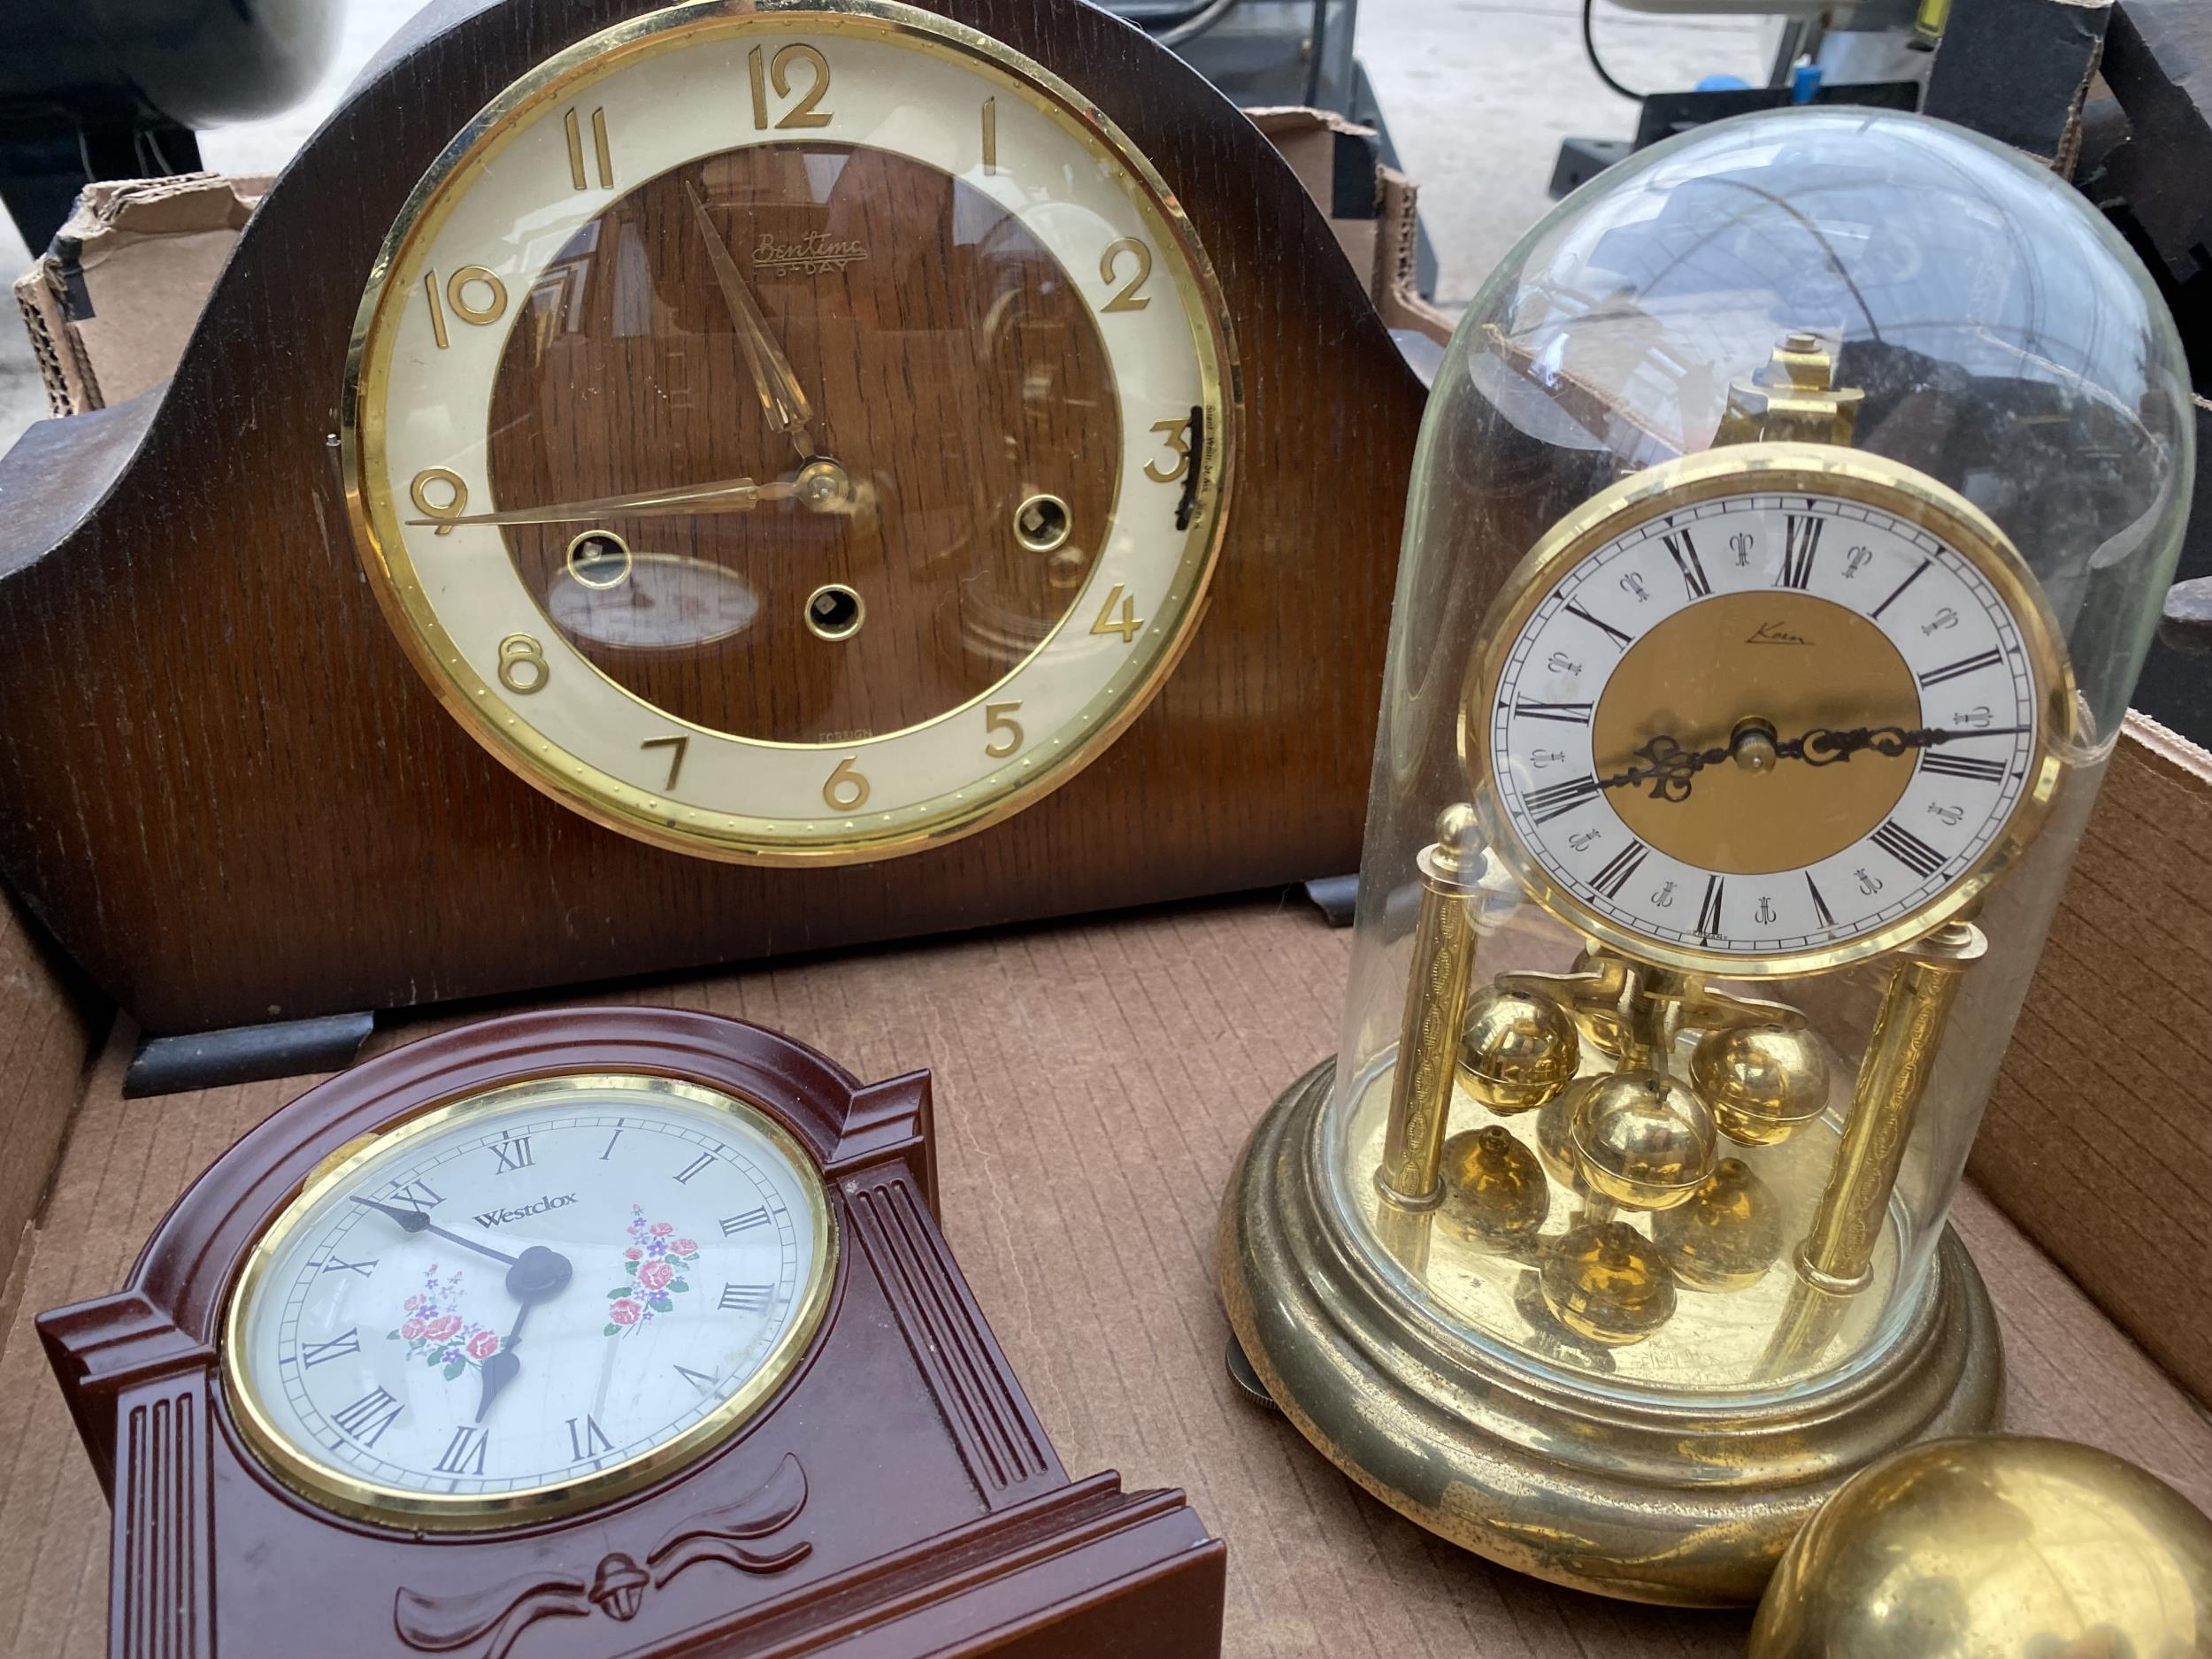 AN ASSORTMENT OF CLOCKS TO INCLUDE AN ANNIVERSARY CLOCK AND A MANTLE CLOCK - Image 2 of 2